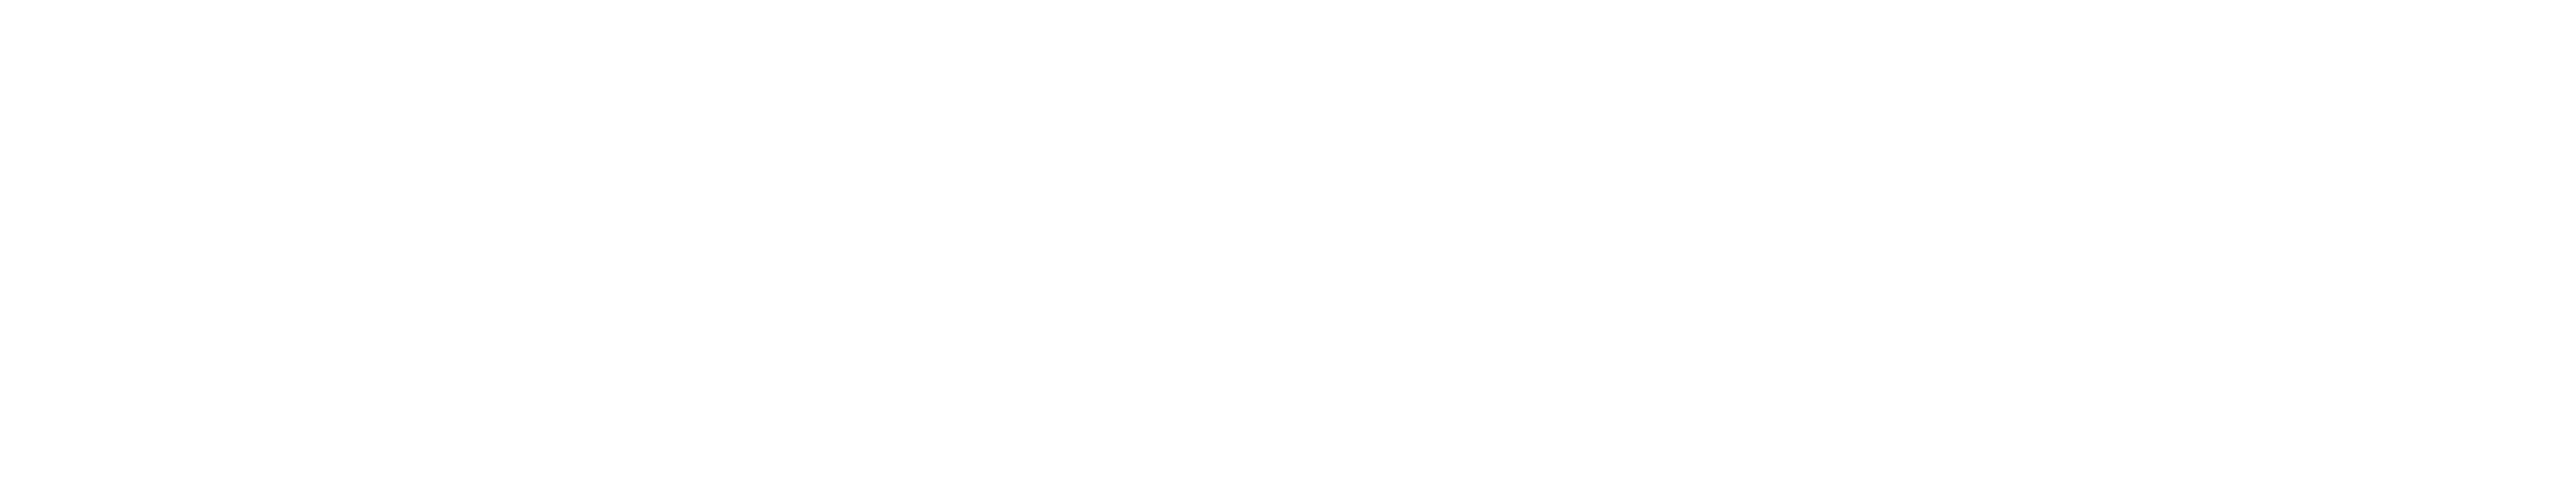 Woocommerce logo in white on a transparent background